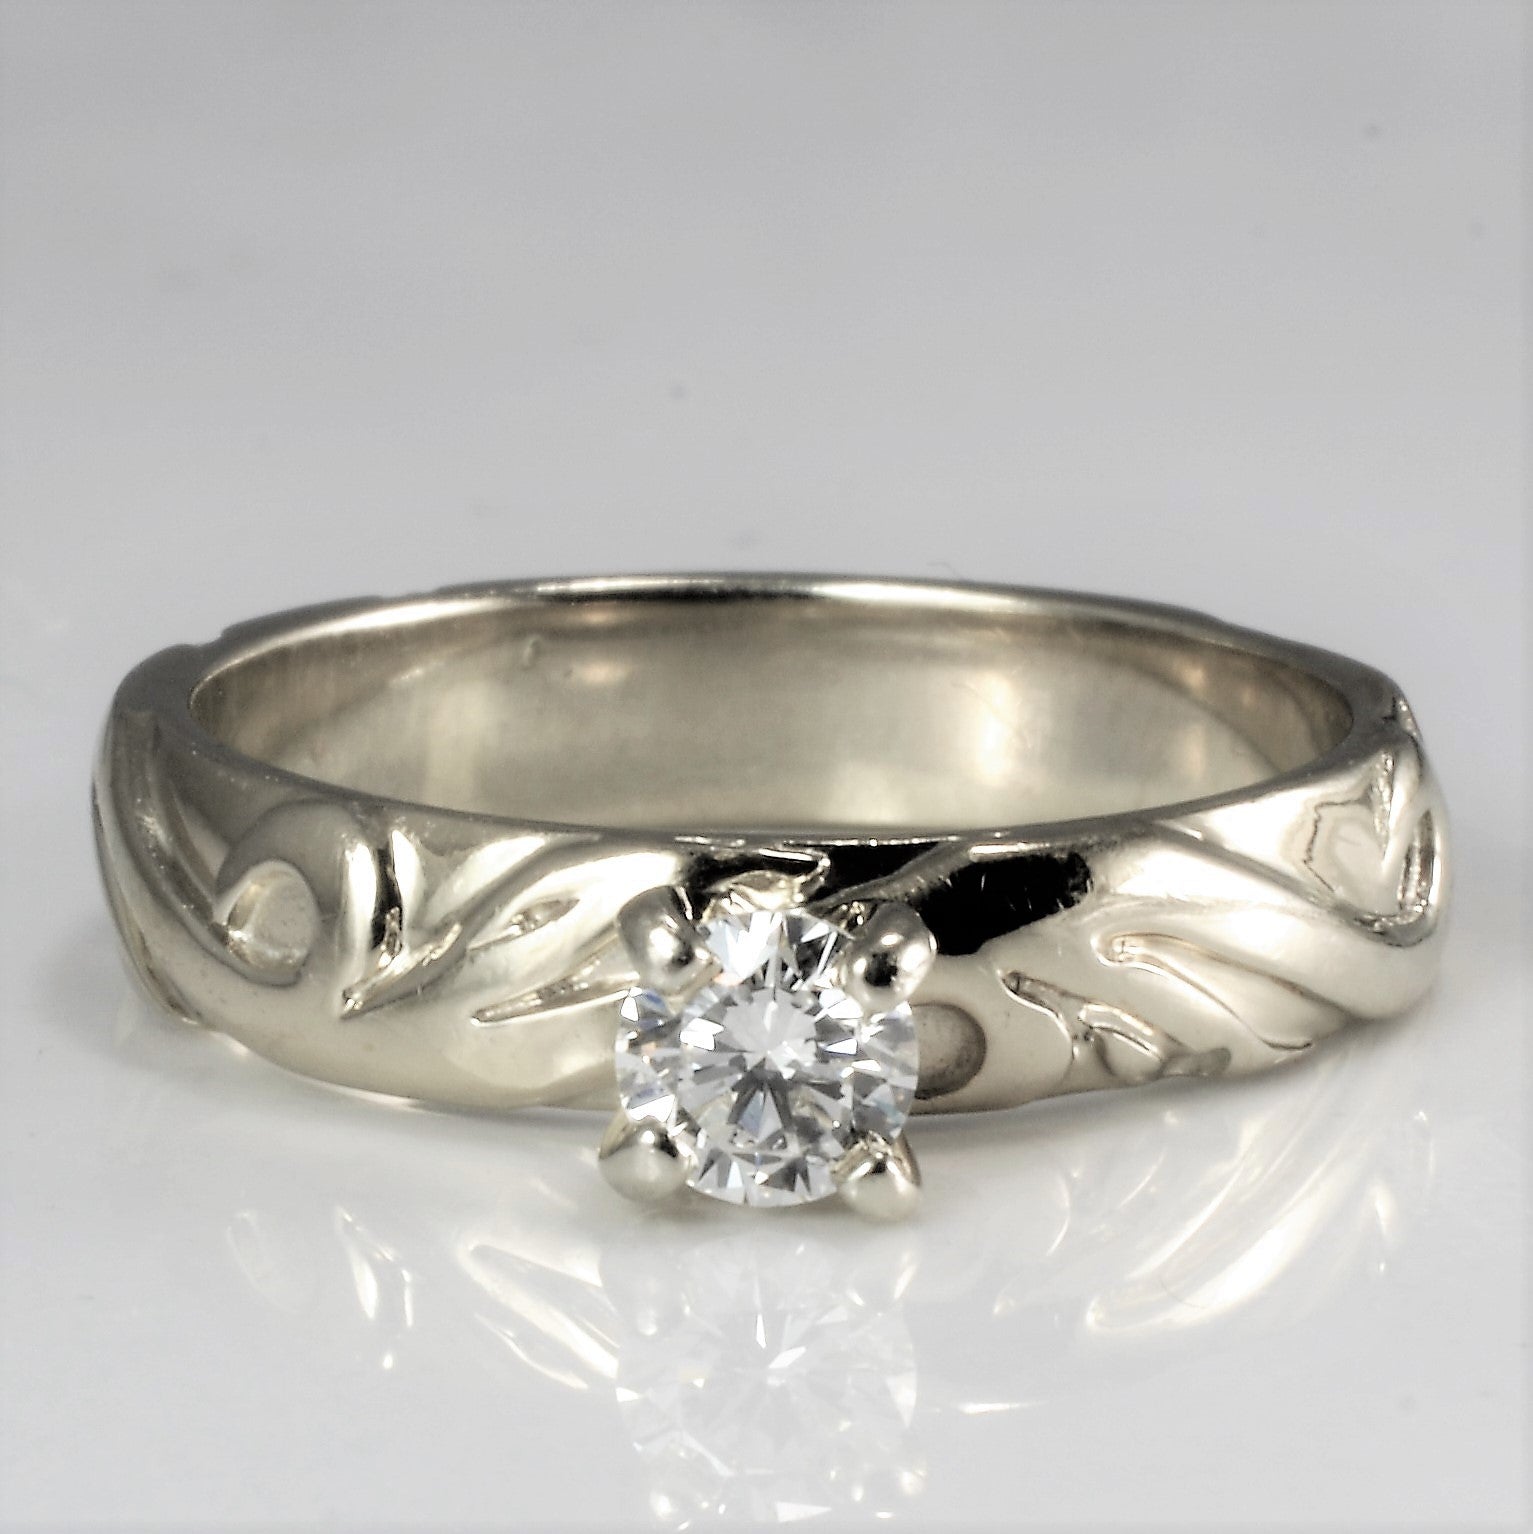 Patterned Solitaire Diamond Ring | 0.23 ct, SZ 5.75 |